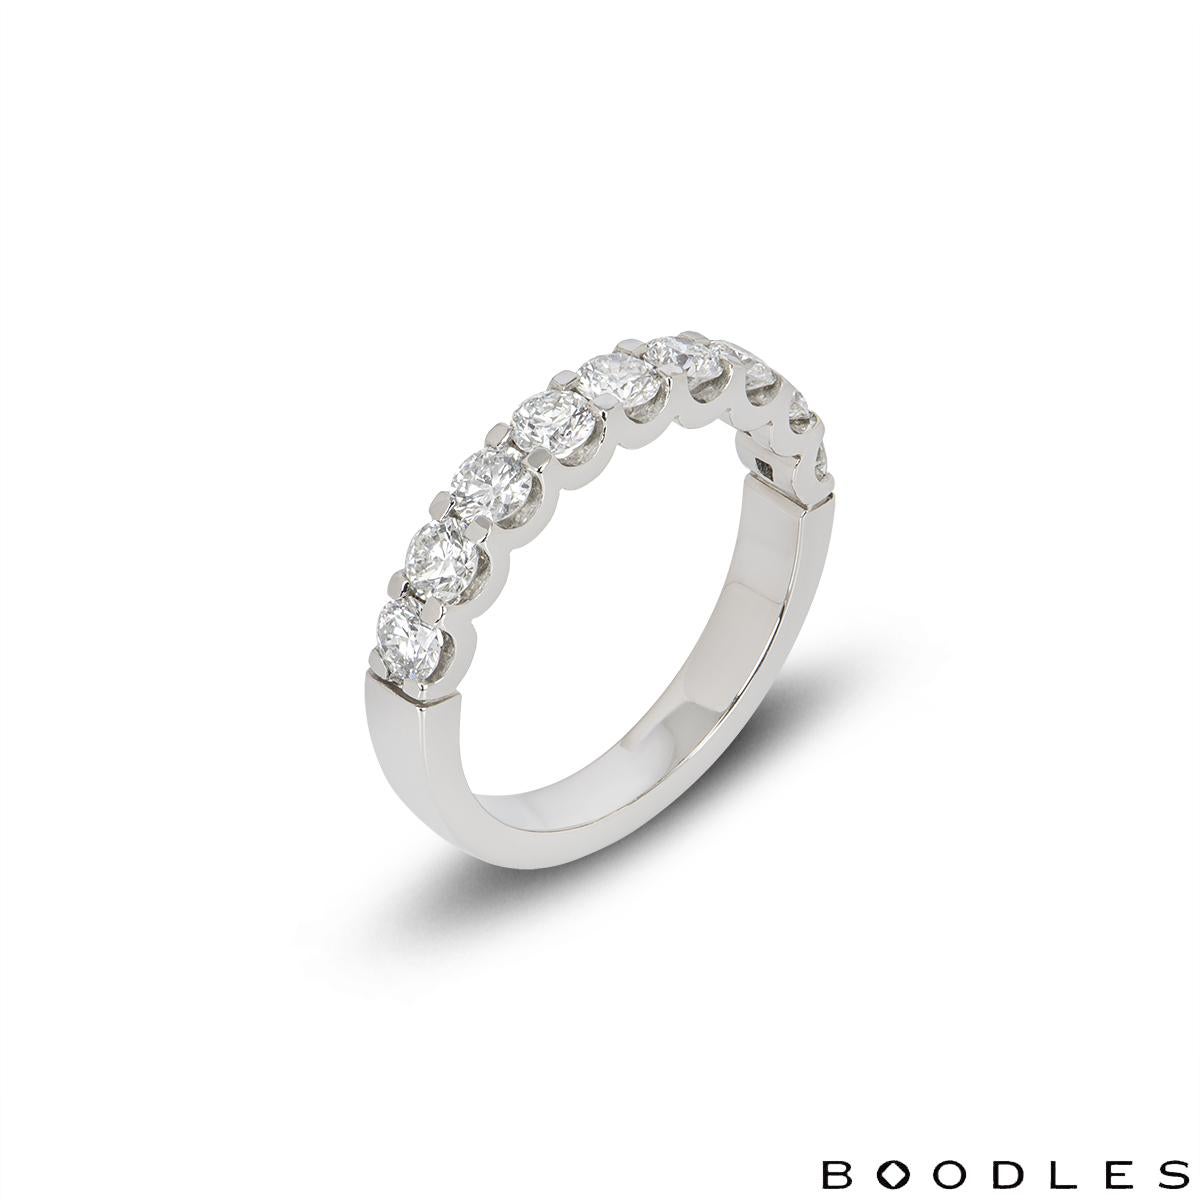 A stunning platinum half eternity diamond ring by Boodles. The ring is set with 9 round brilliant cut diamonds totalling an approximate weight of 1.16ct, E-F colour and VS clarity. The ring measures 3.5mm in width and has a gross weight of 6.4